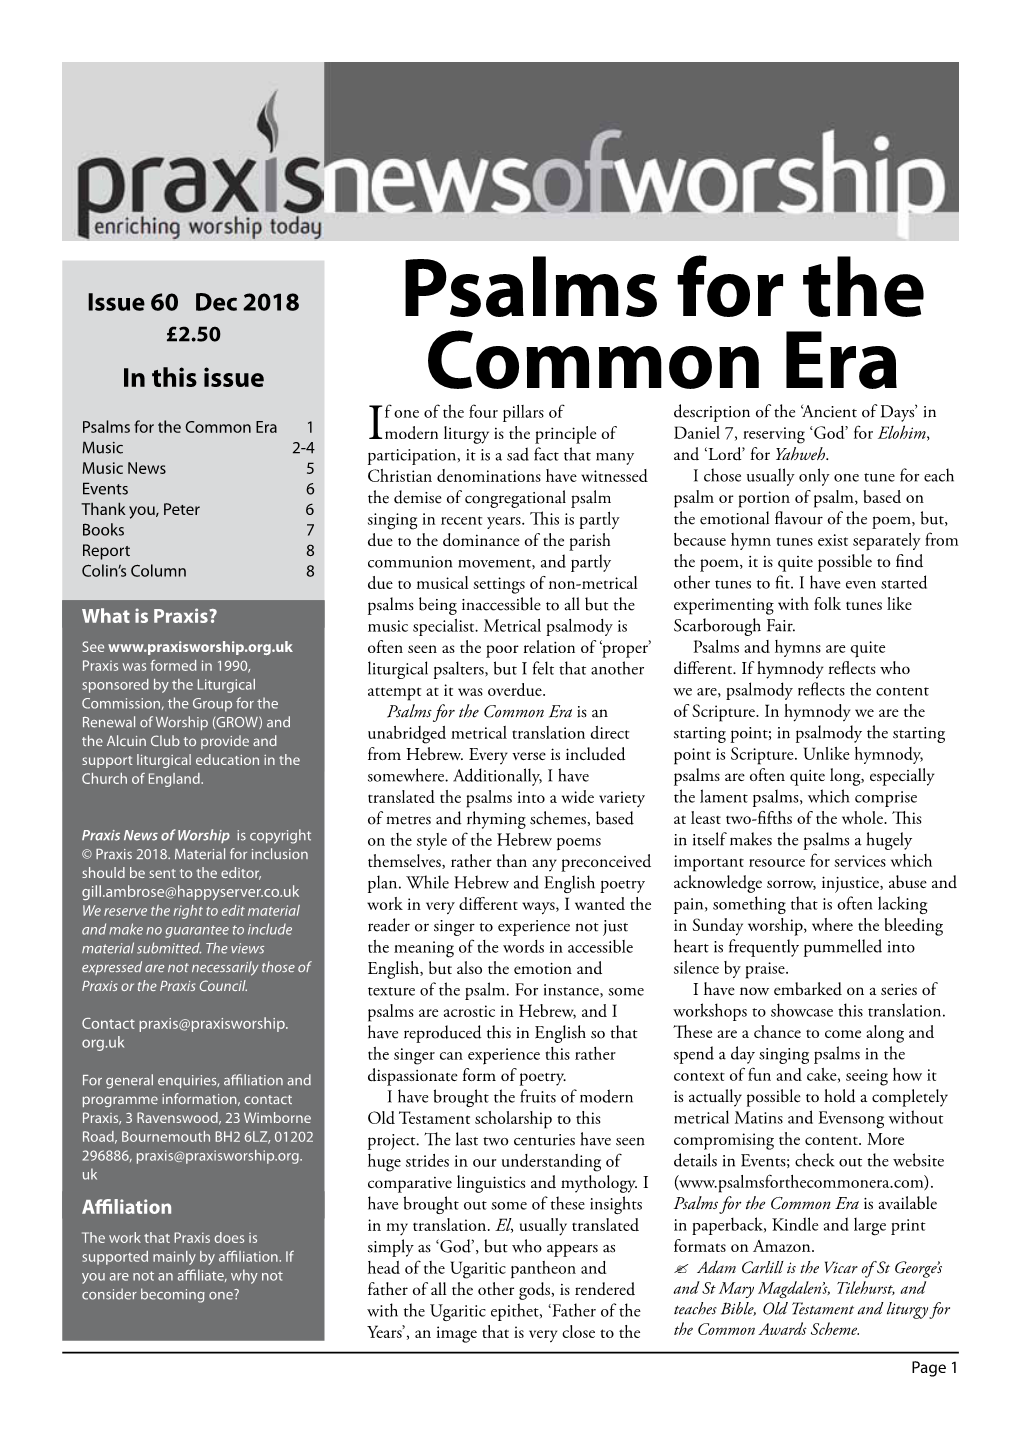 Psalms for the Common